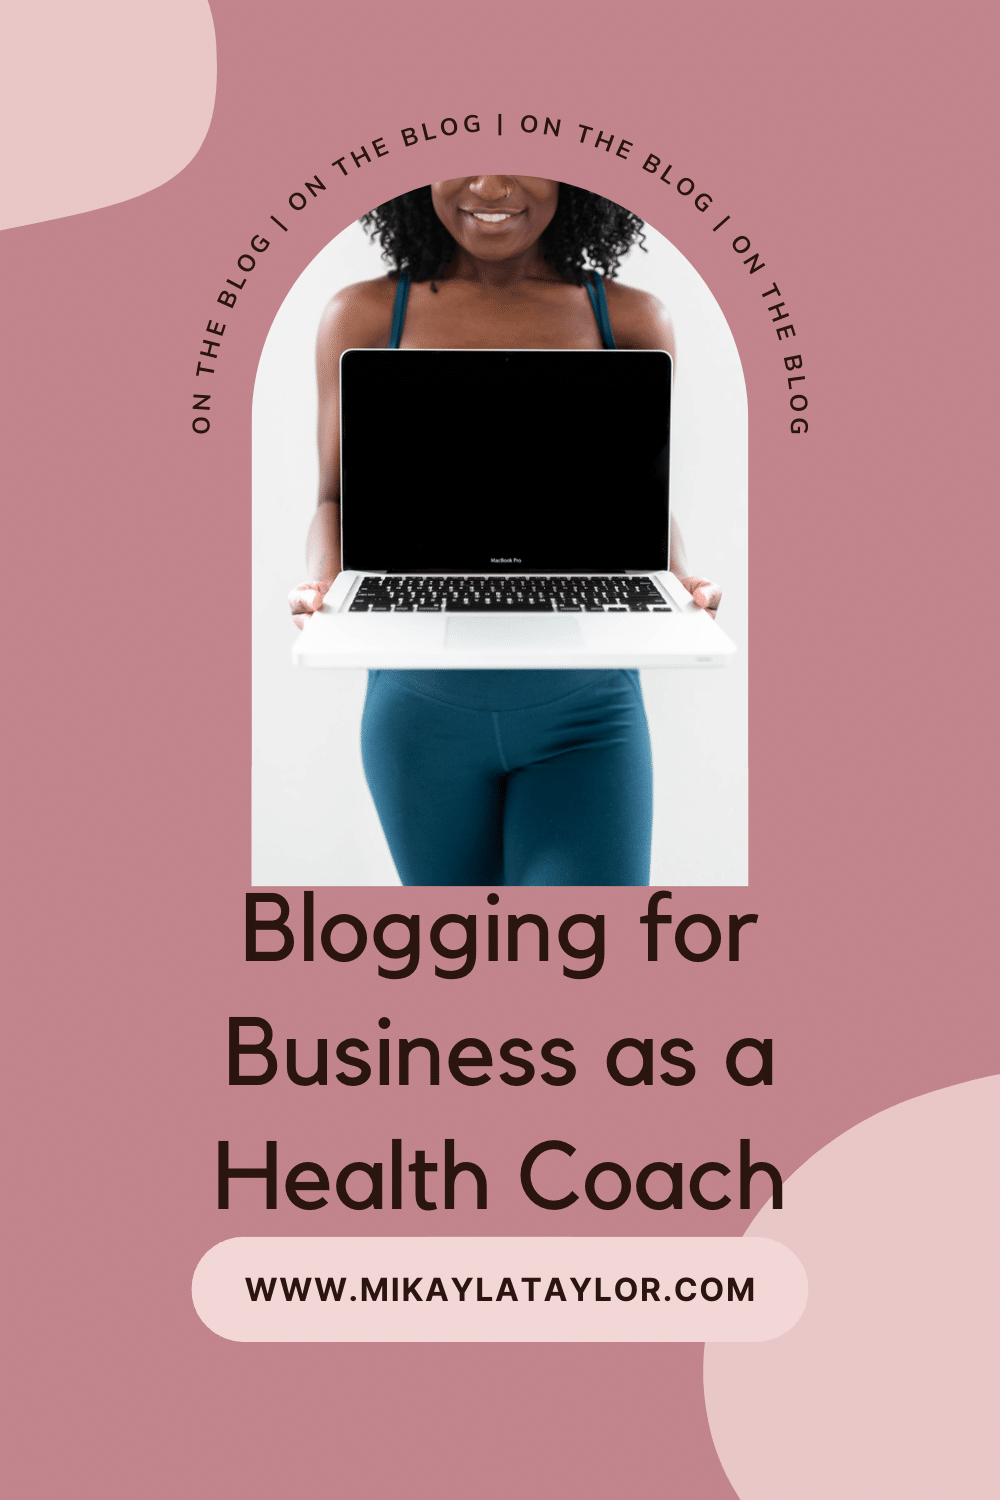 blogging for business as a health coach - how to start health coaching blog